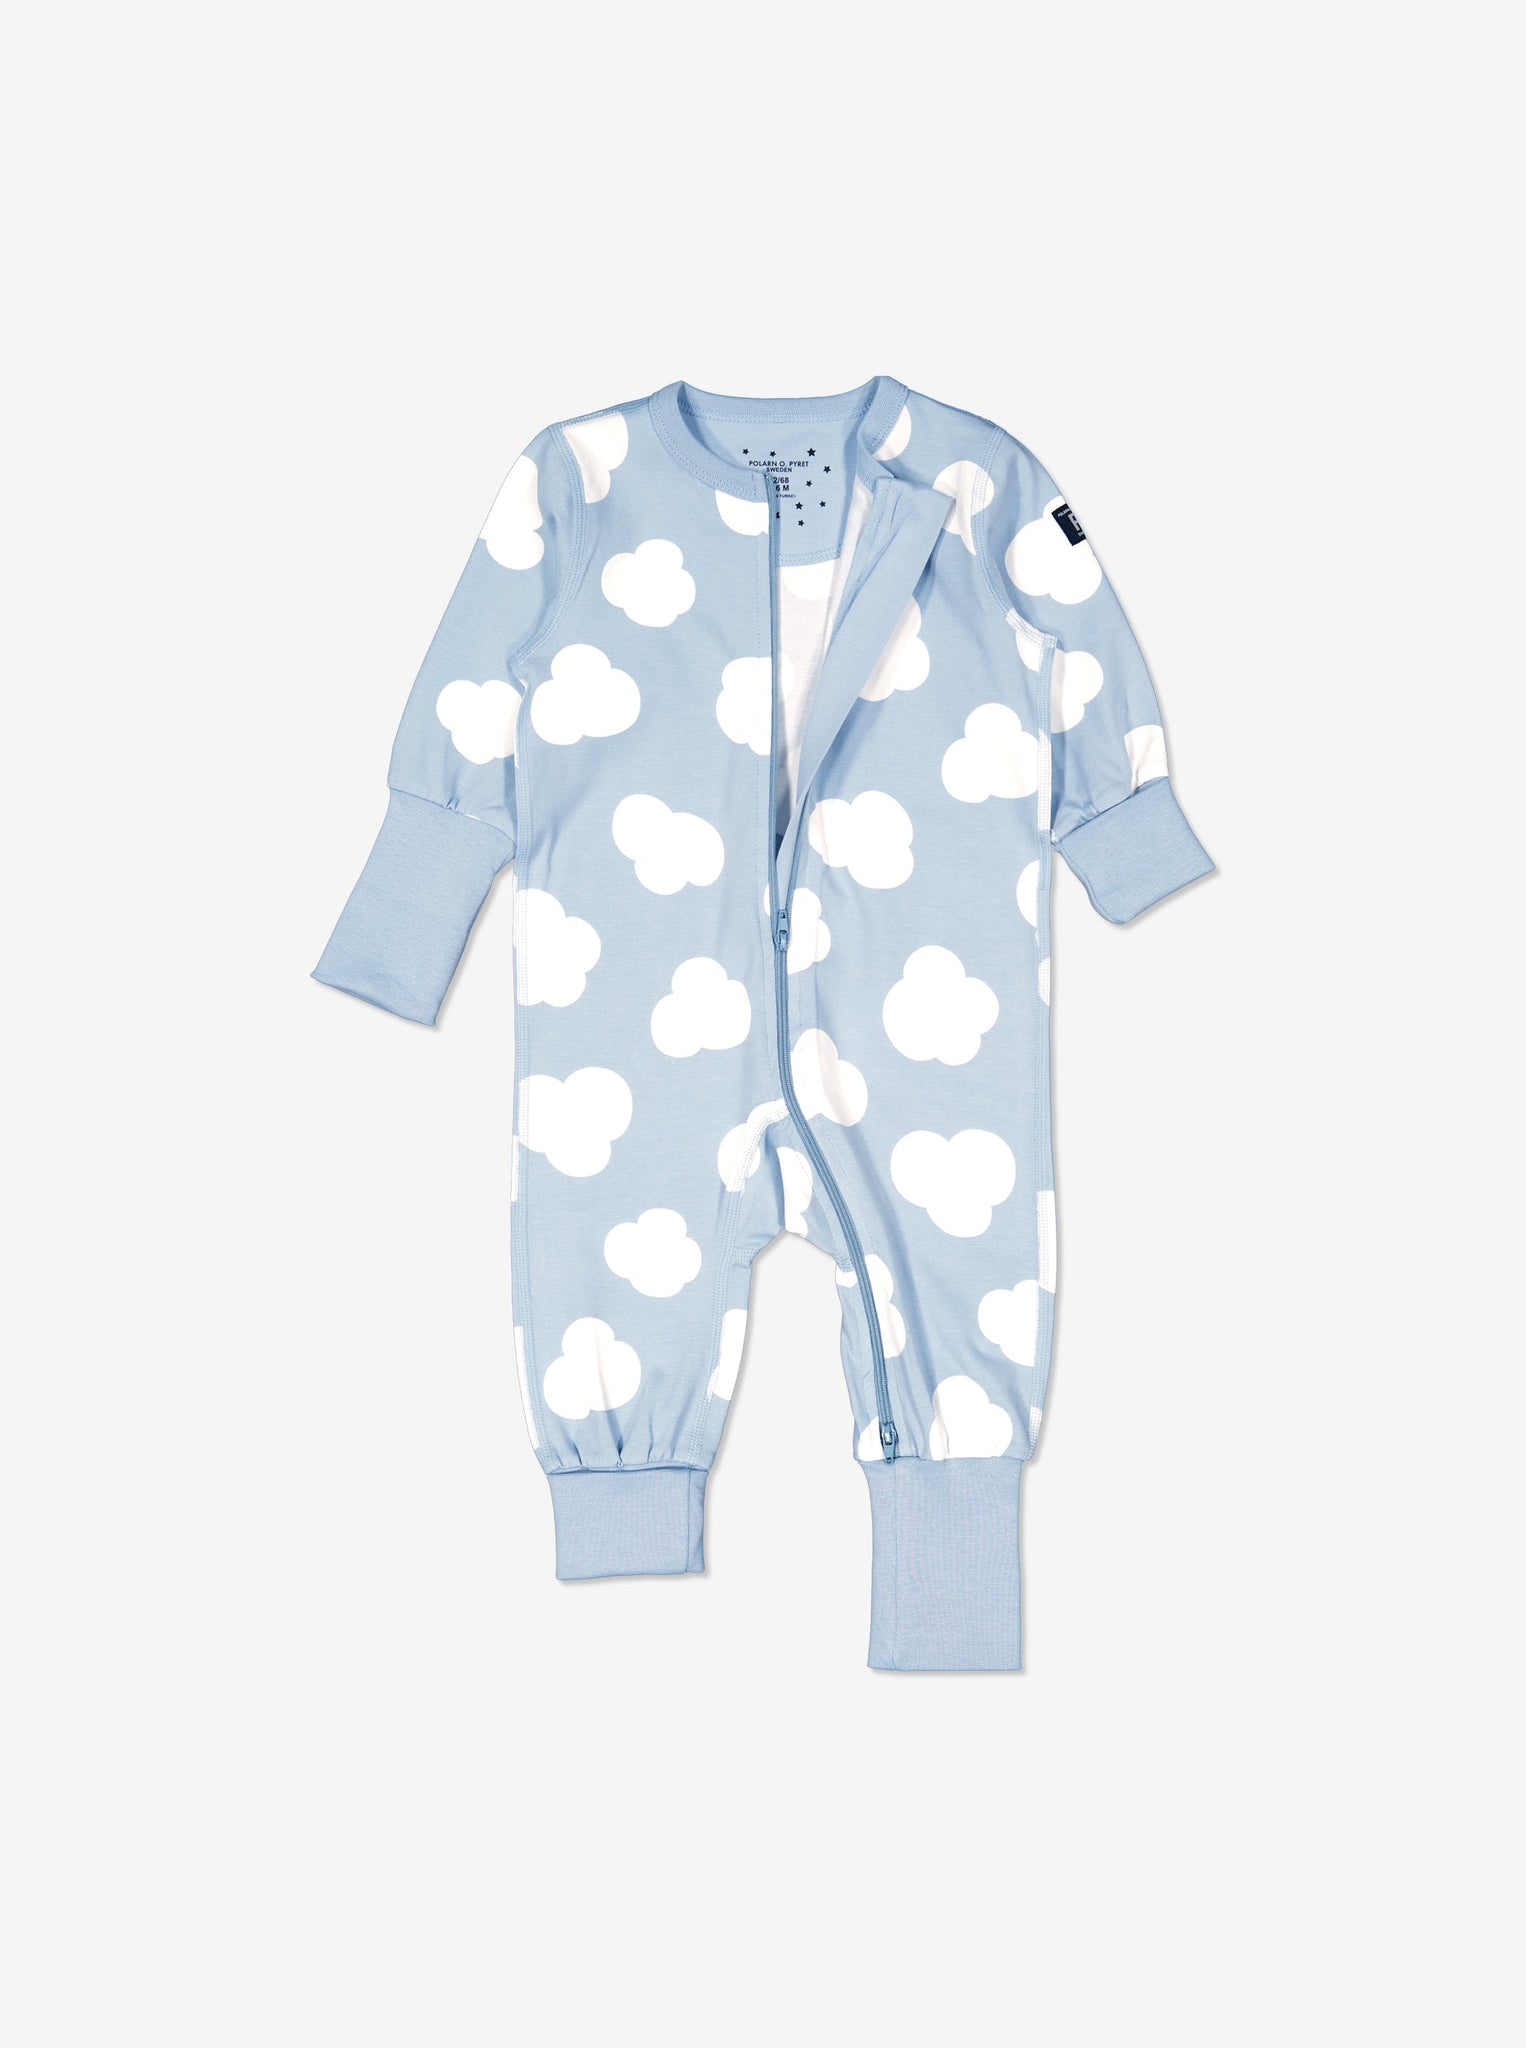  Blue Cloud Print Baby Sleepsuit from Polarn O. Pyret Kidswear. Made using ethically sourced materials.